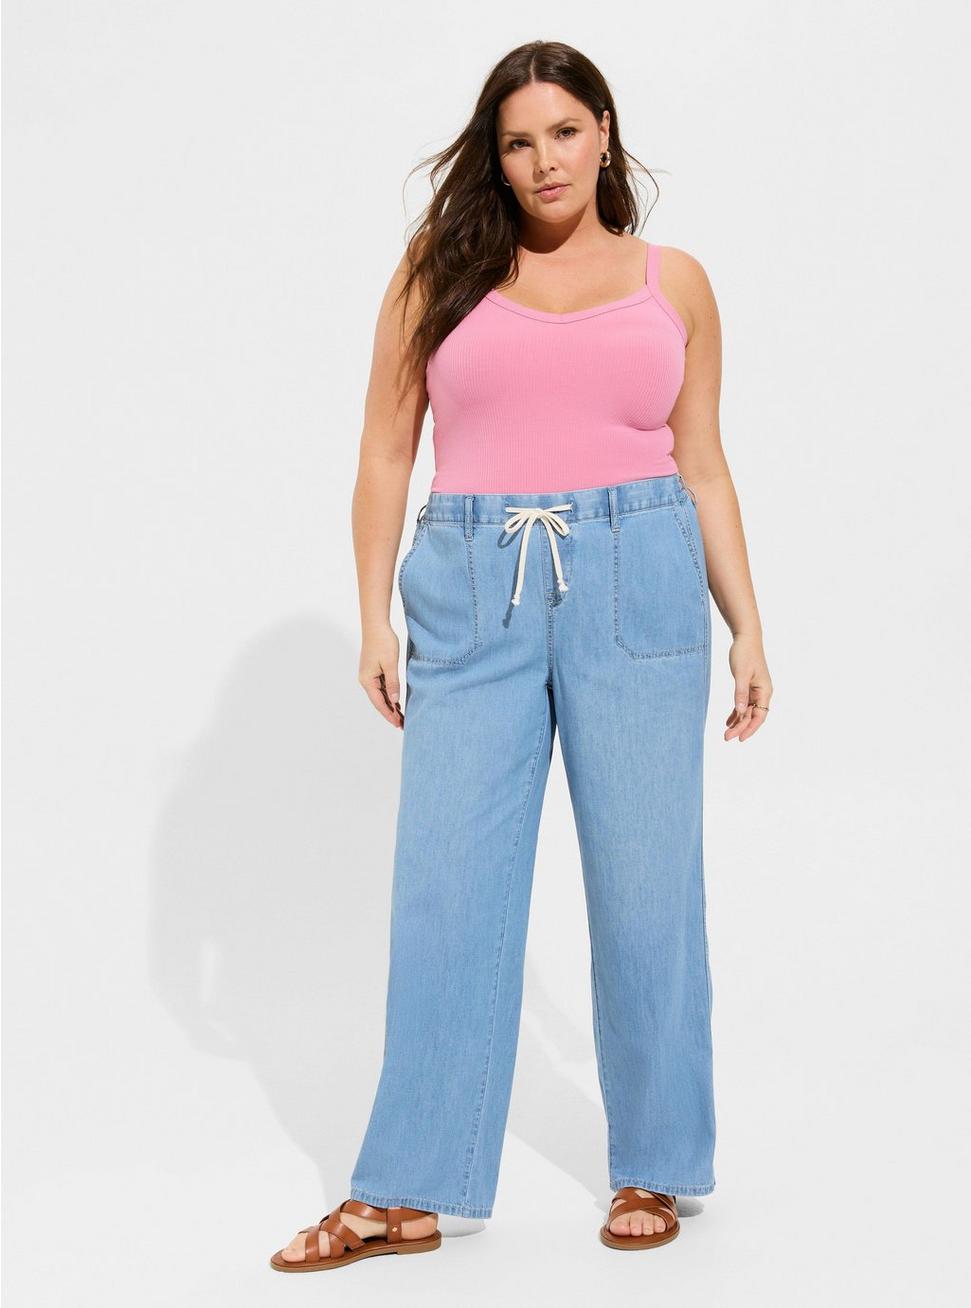 Pull-On Wide Leg Light Weight Jean, LIGHT WASH, hi-res